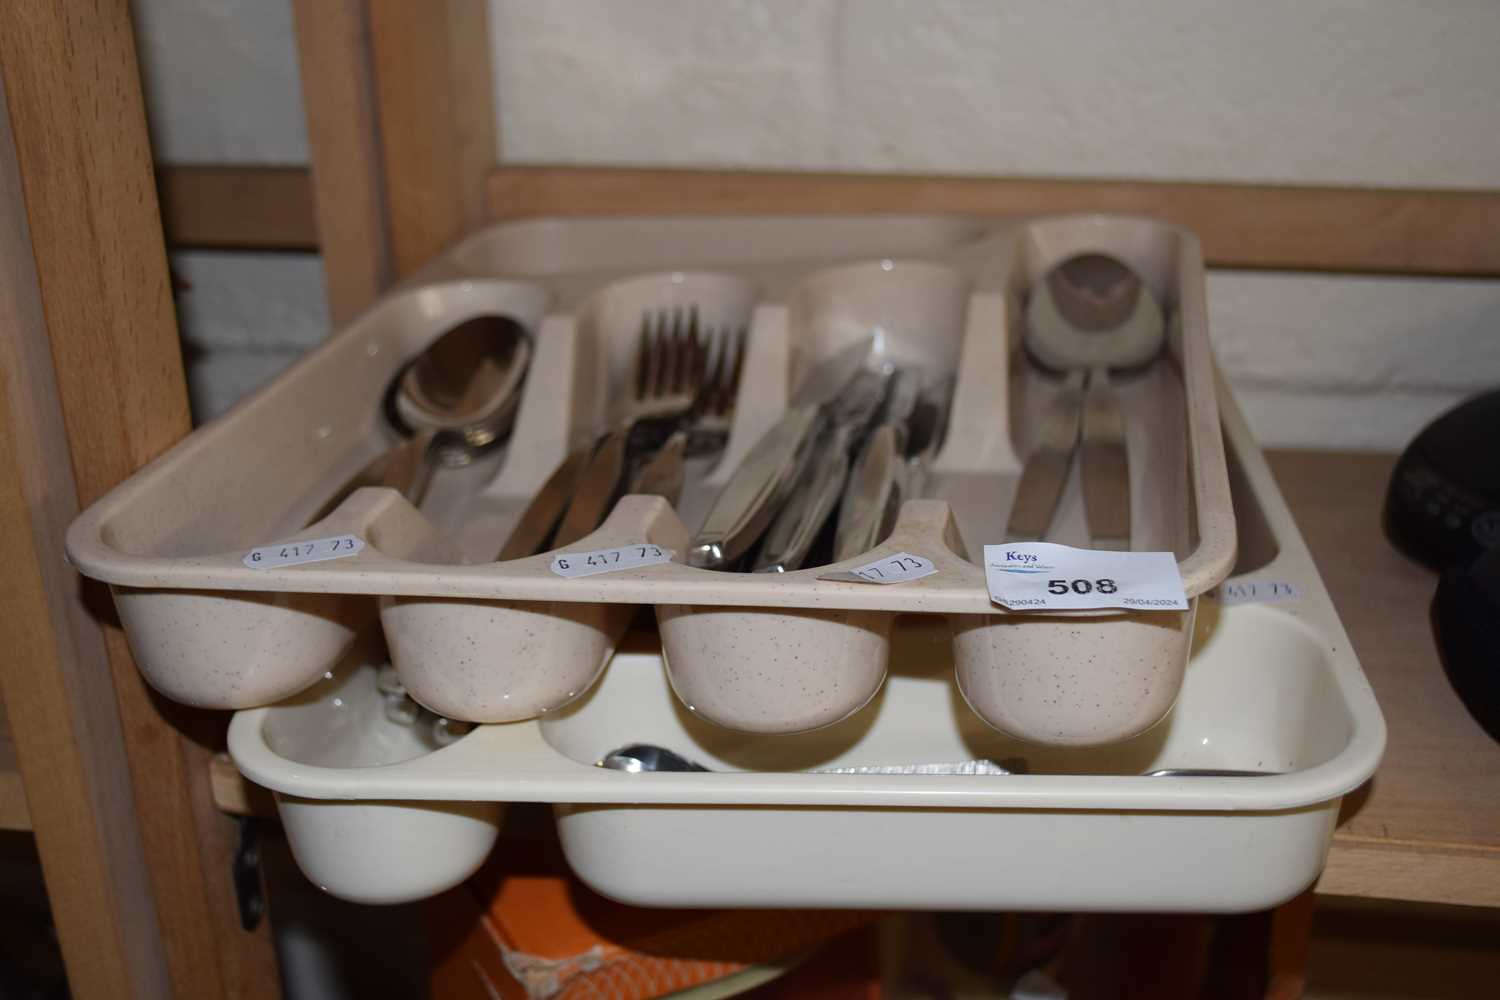 Two trays of steel cutlery